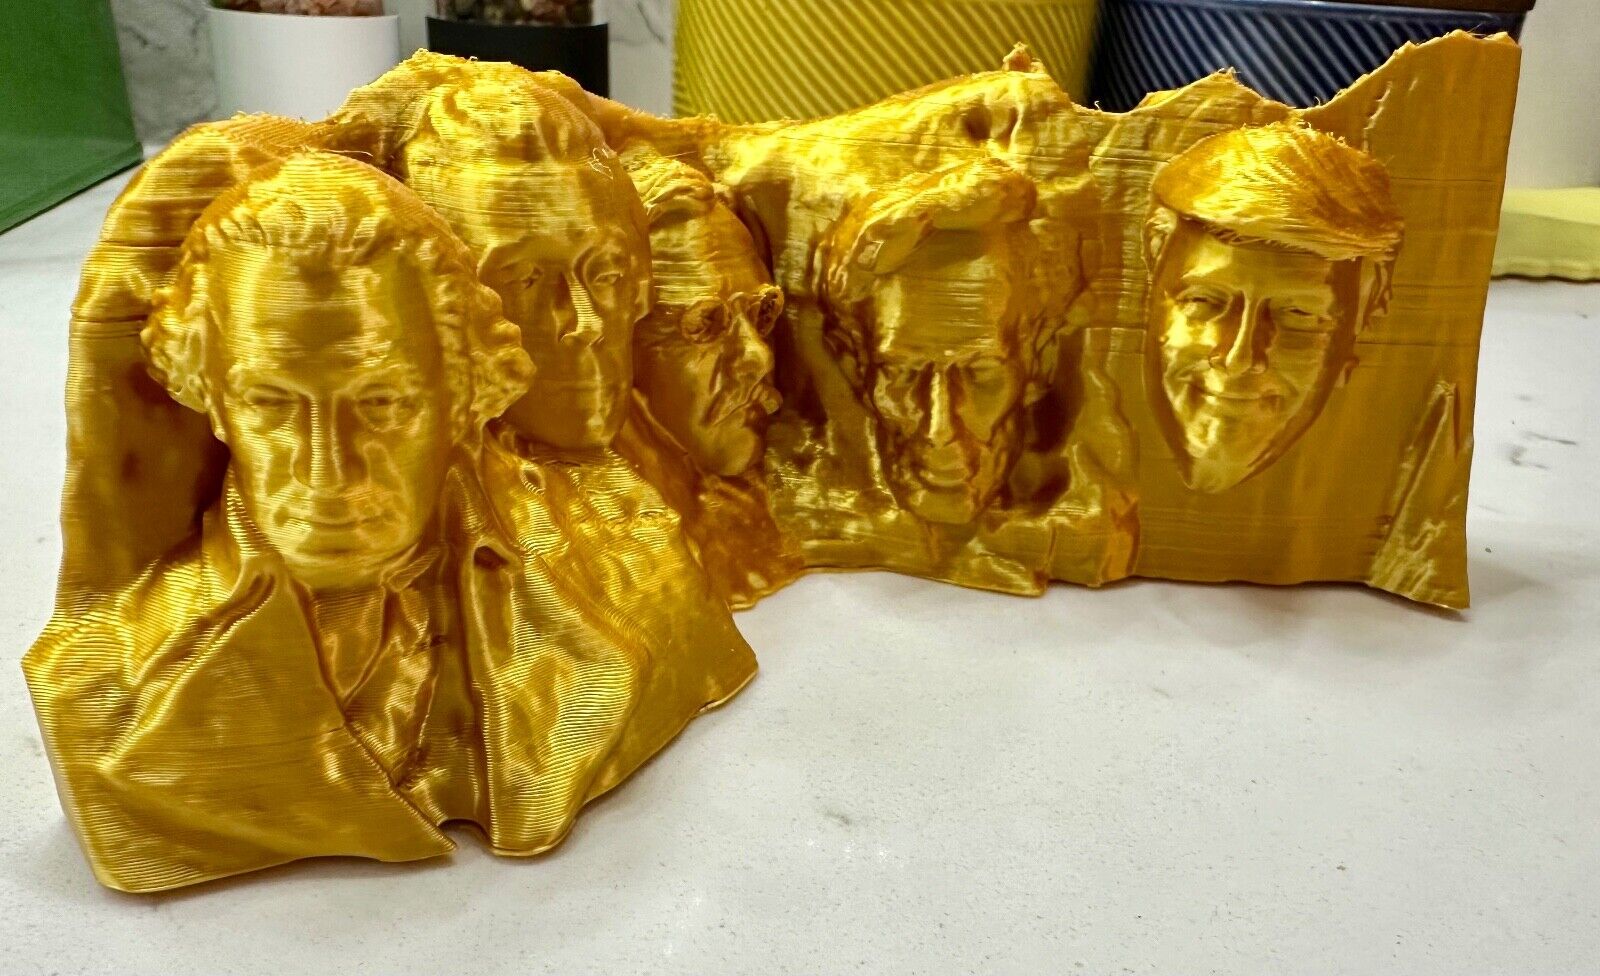 Mount Rushmore featuring President Donald Trump - New and Improved Design